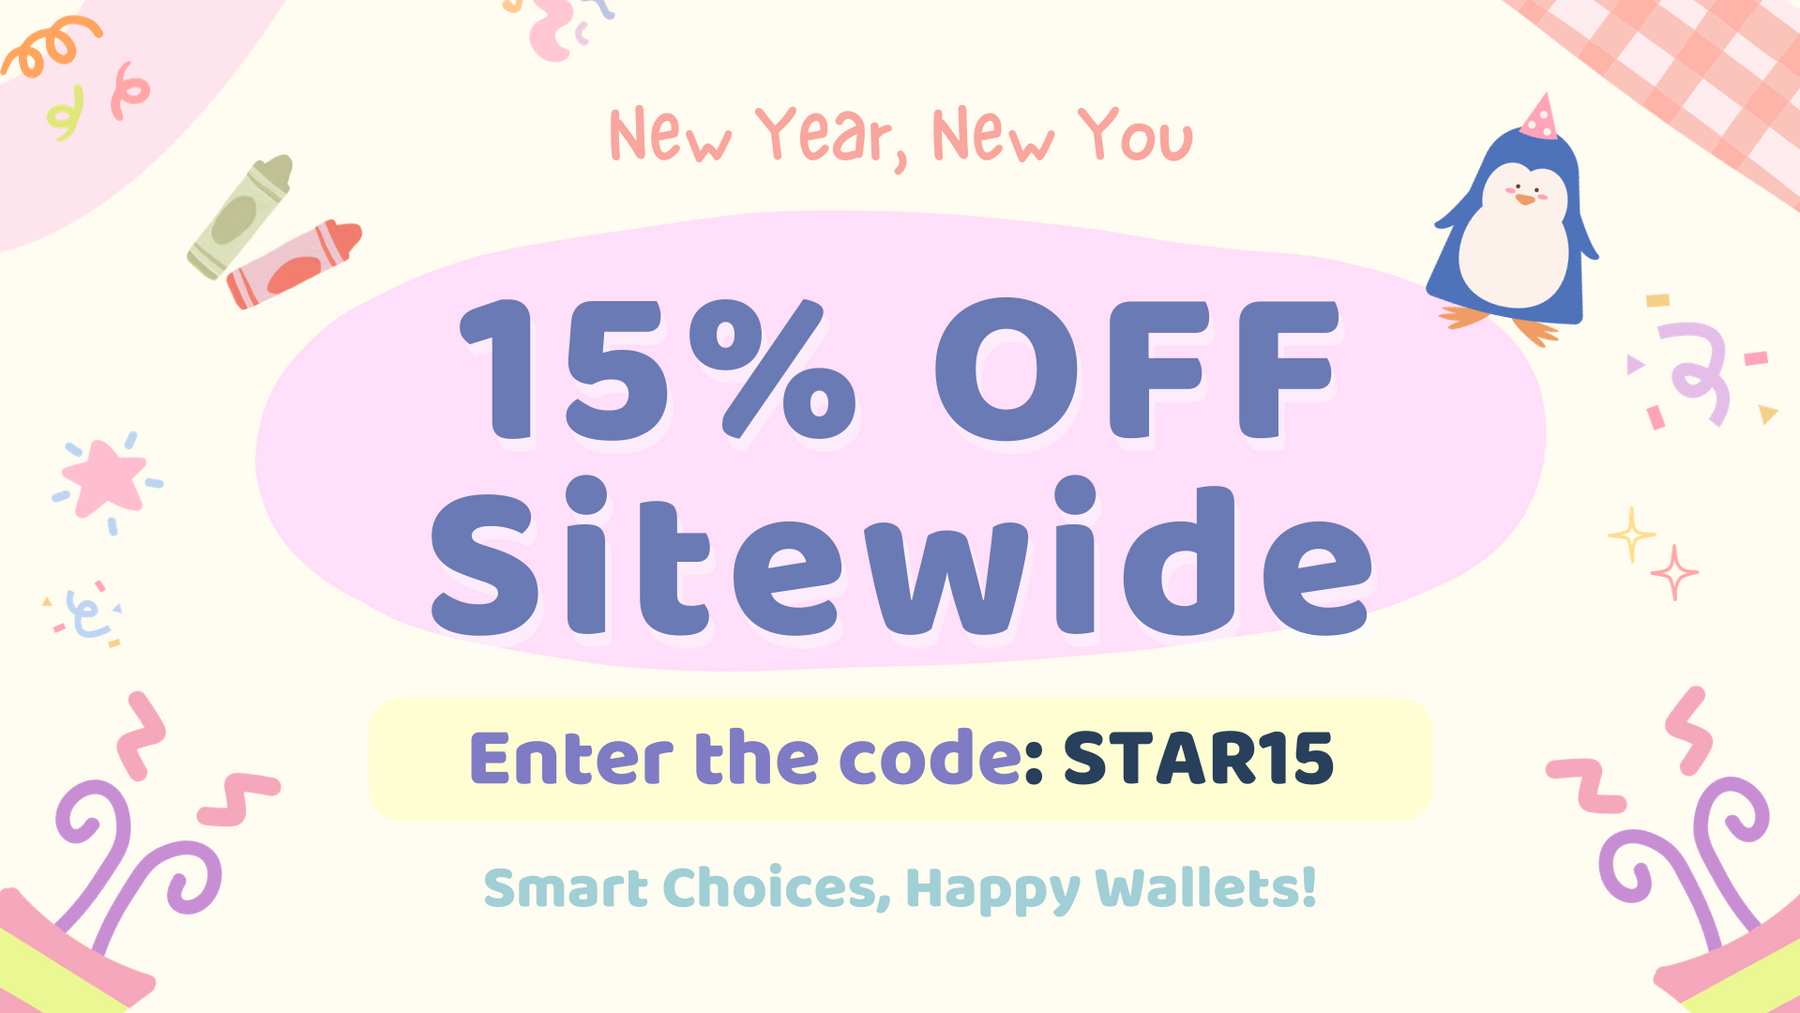 Get Your 15% OFF Sitewide Now!✨